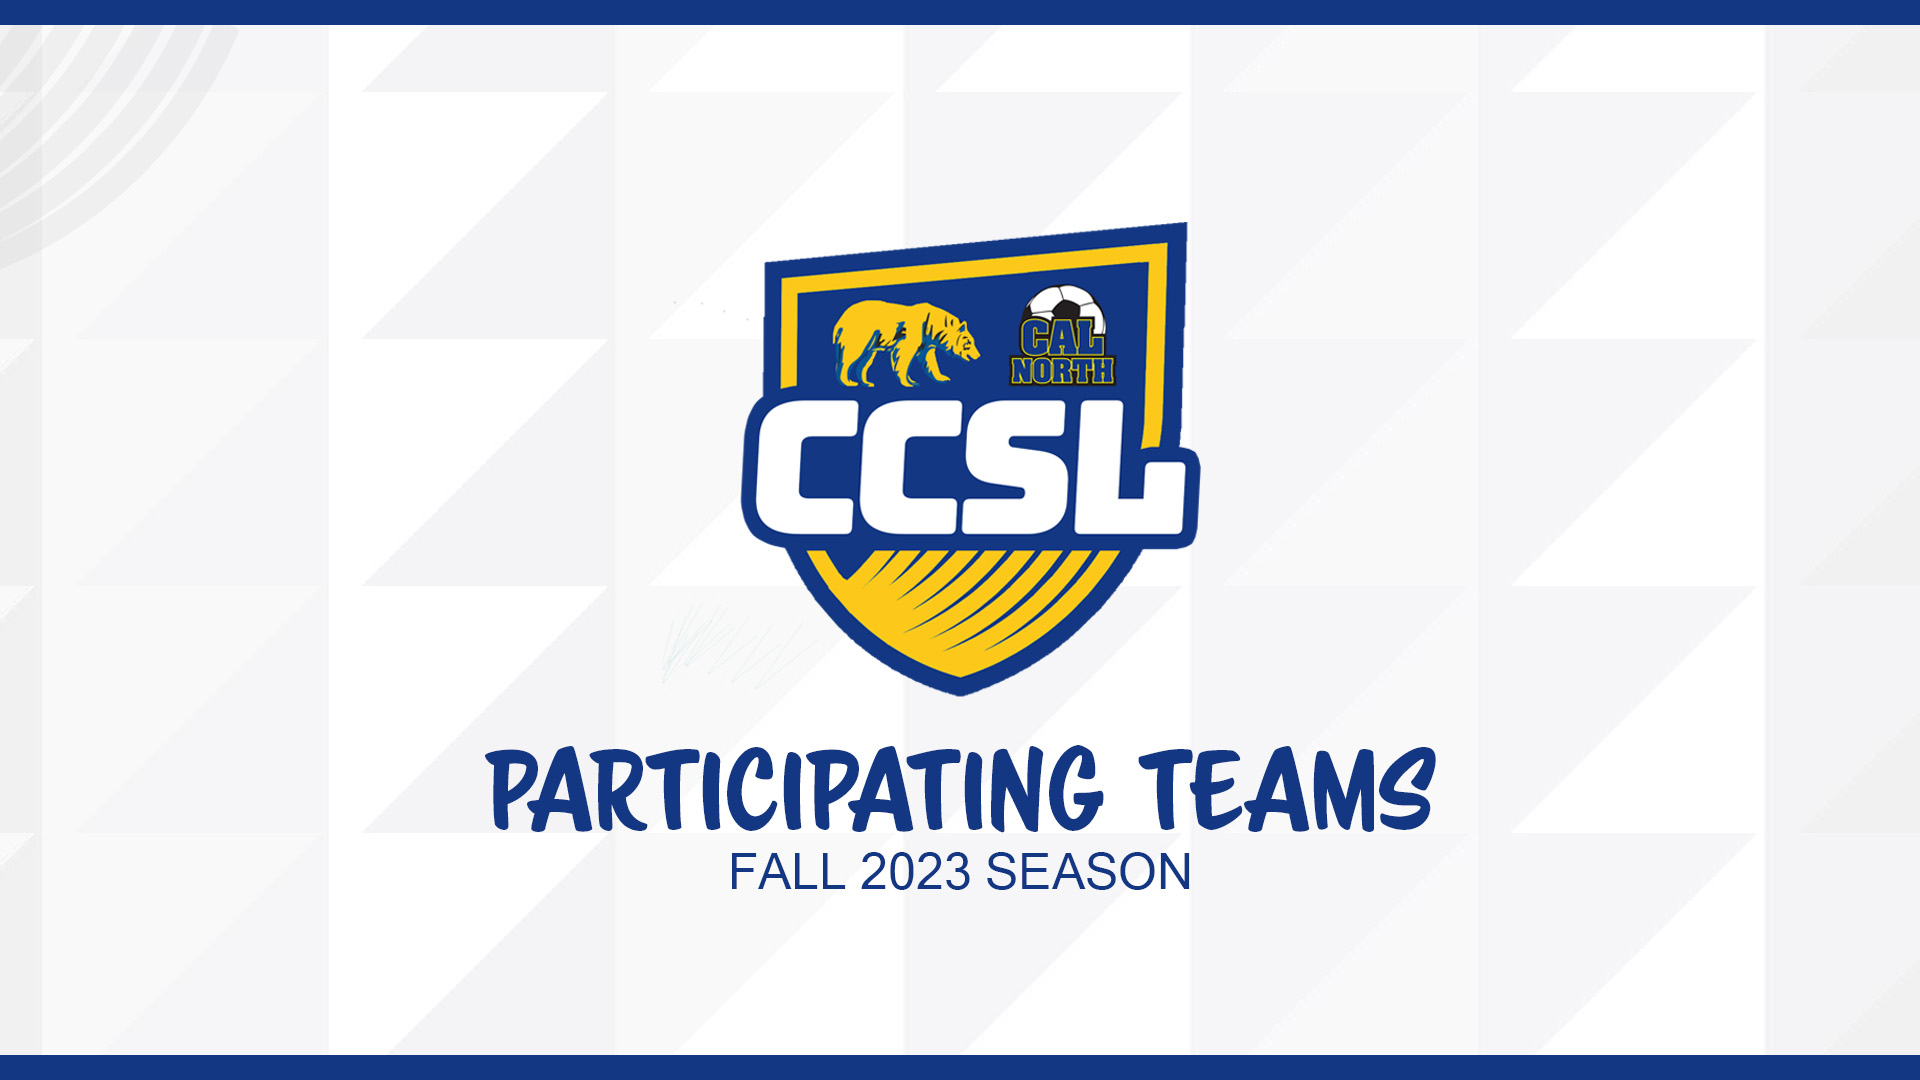 List of participating teams in CCSL for Fall 2023 season